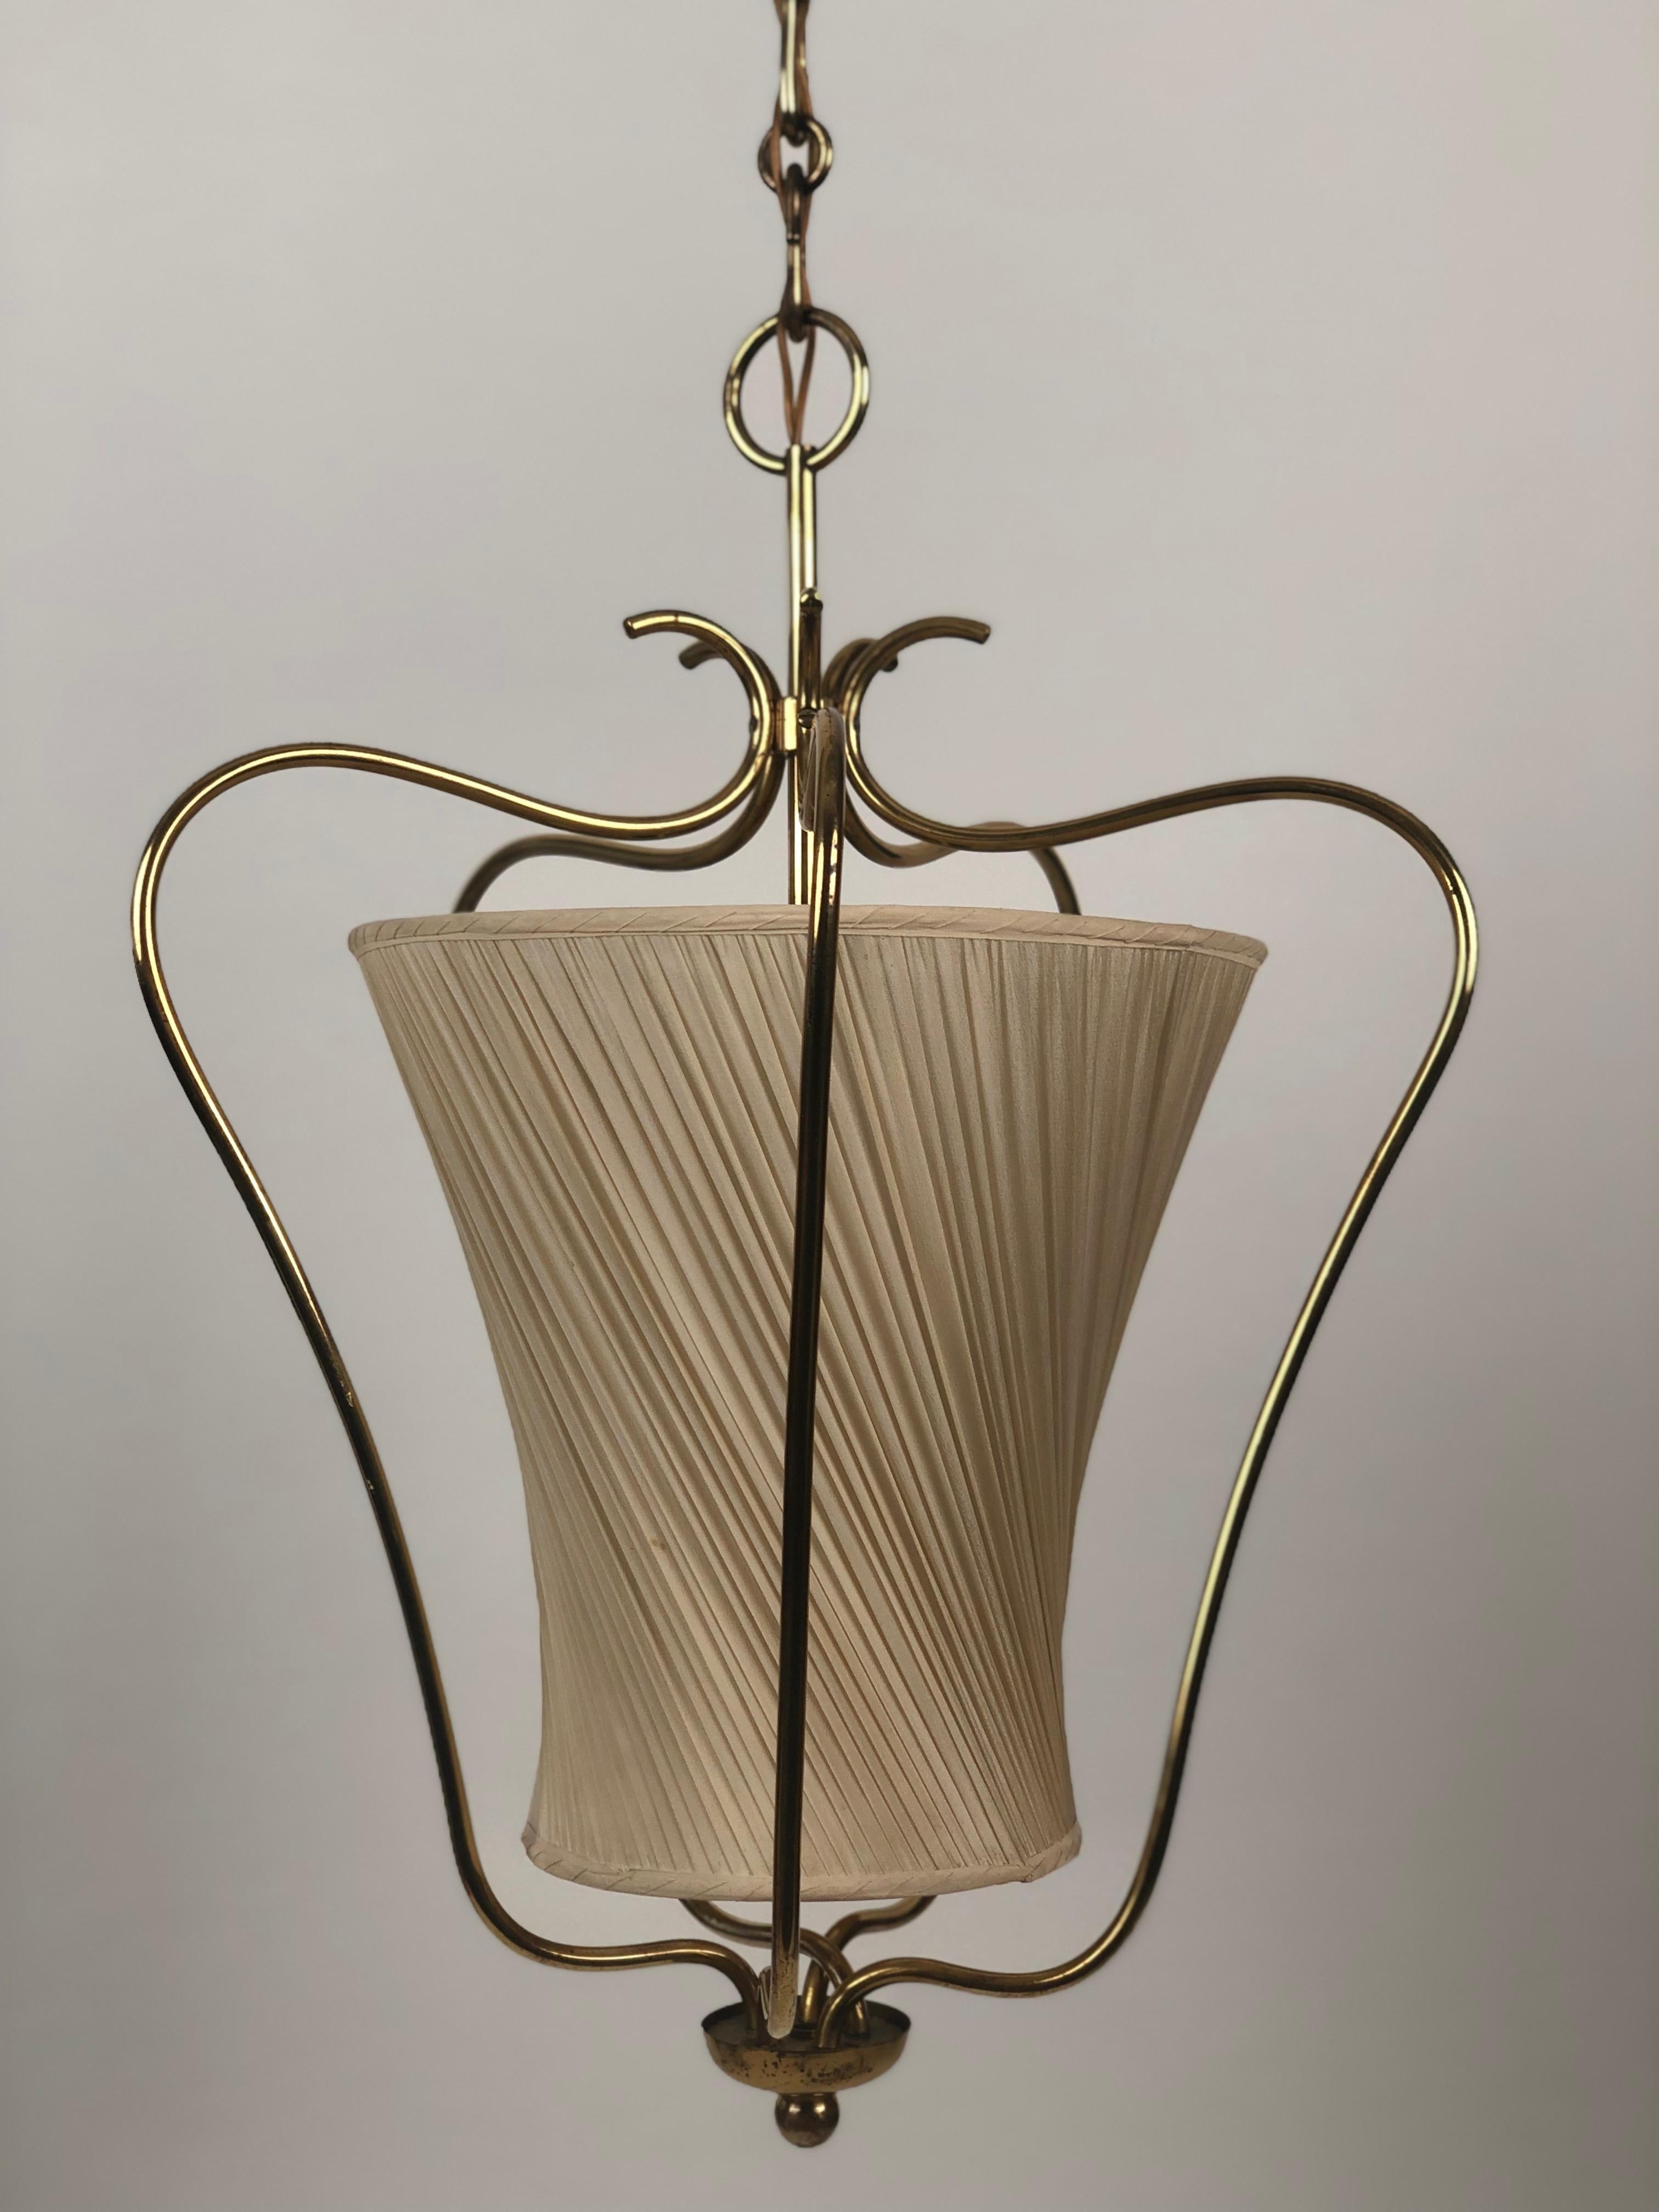 Brass pendant lamp from Rupert Nikoll with original silk shade. This lamp is in very good condition with a lovely patina. The styling is inspired from Regency. This is a very elegant design

The electric has been tested and all the elects are in